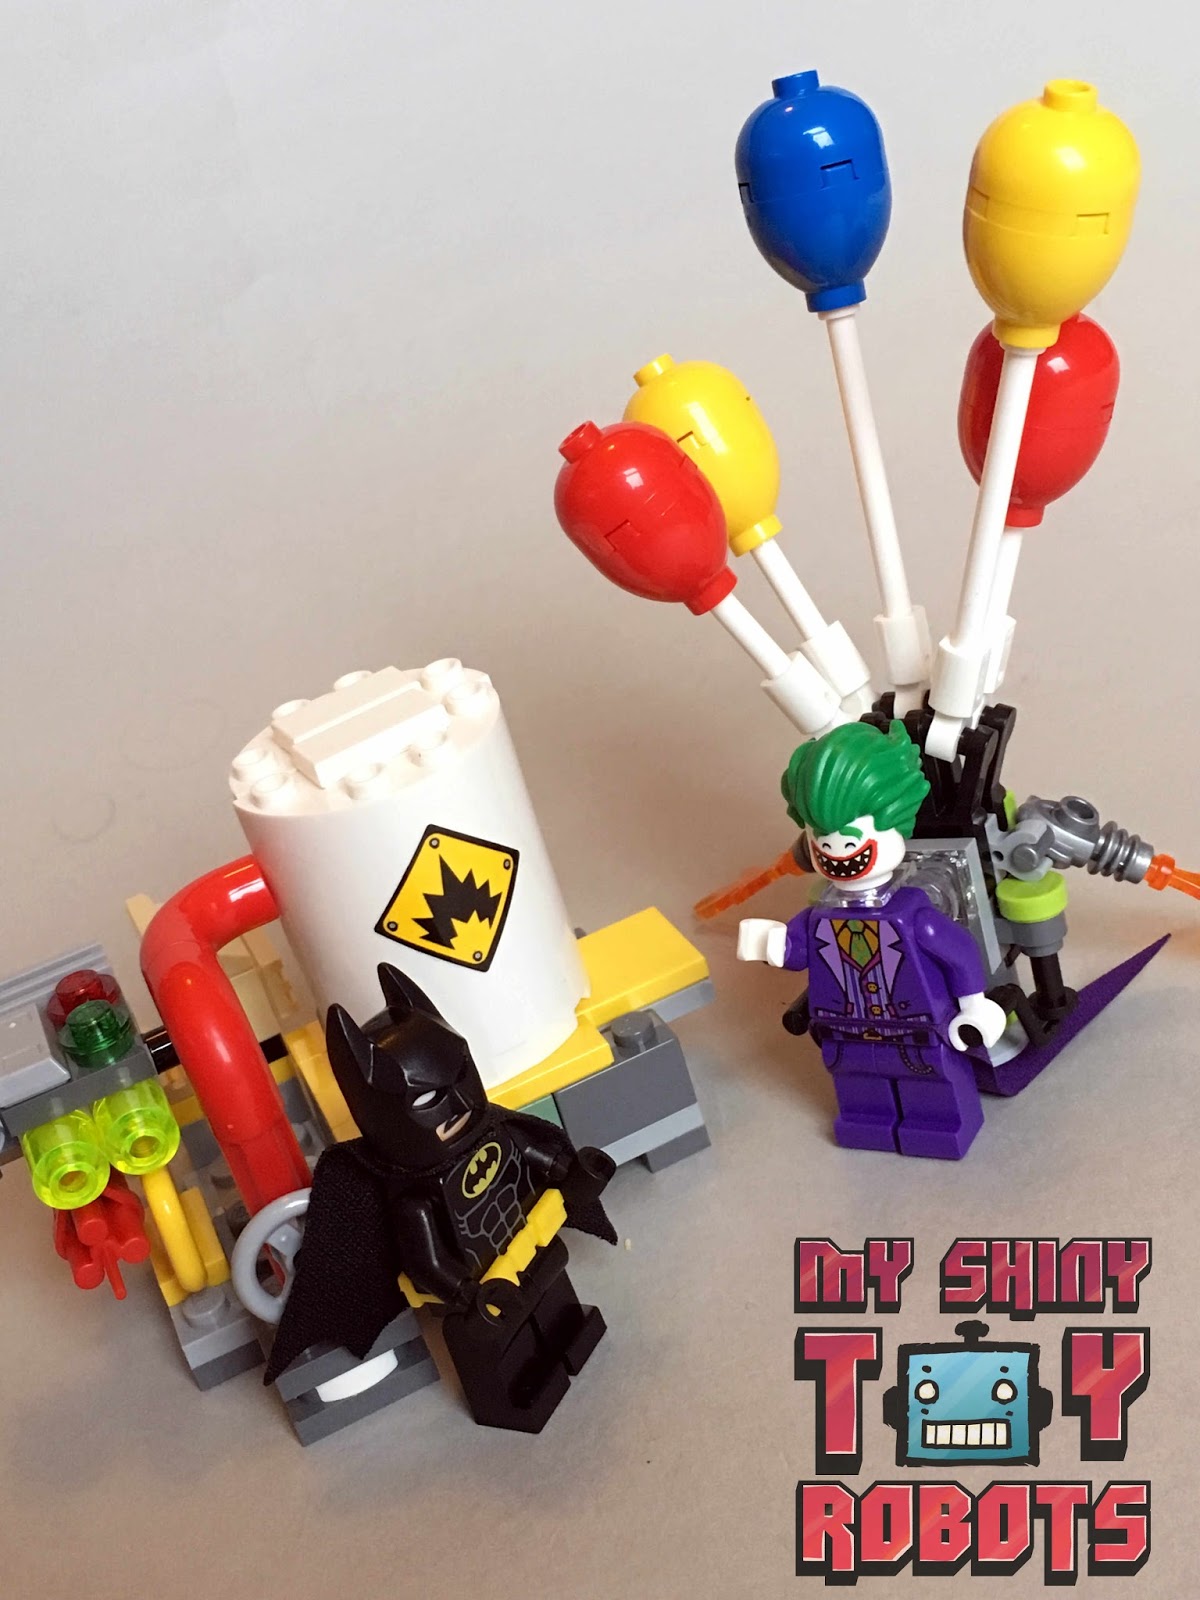 The LEGO Batman Movie 70900 The Joker Balloon Escape [Review] - The  Brothers Brick